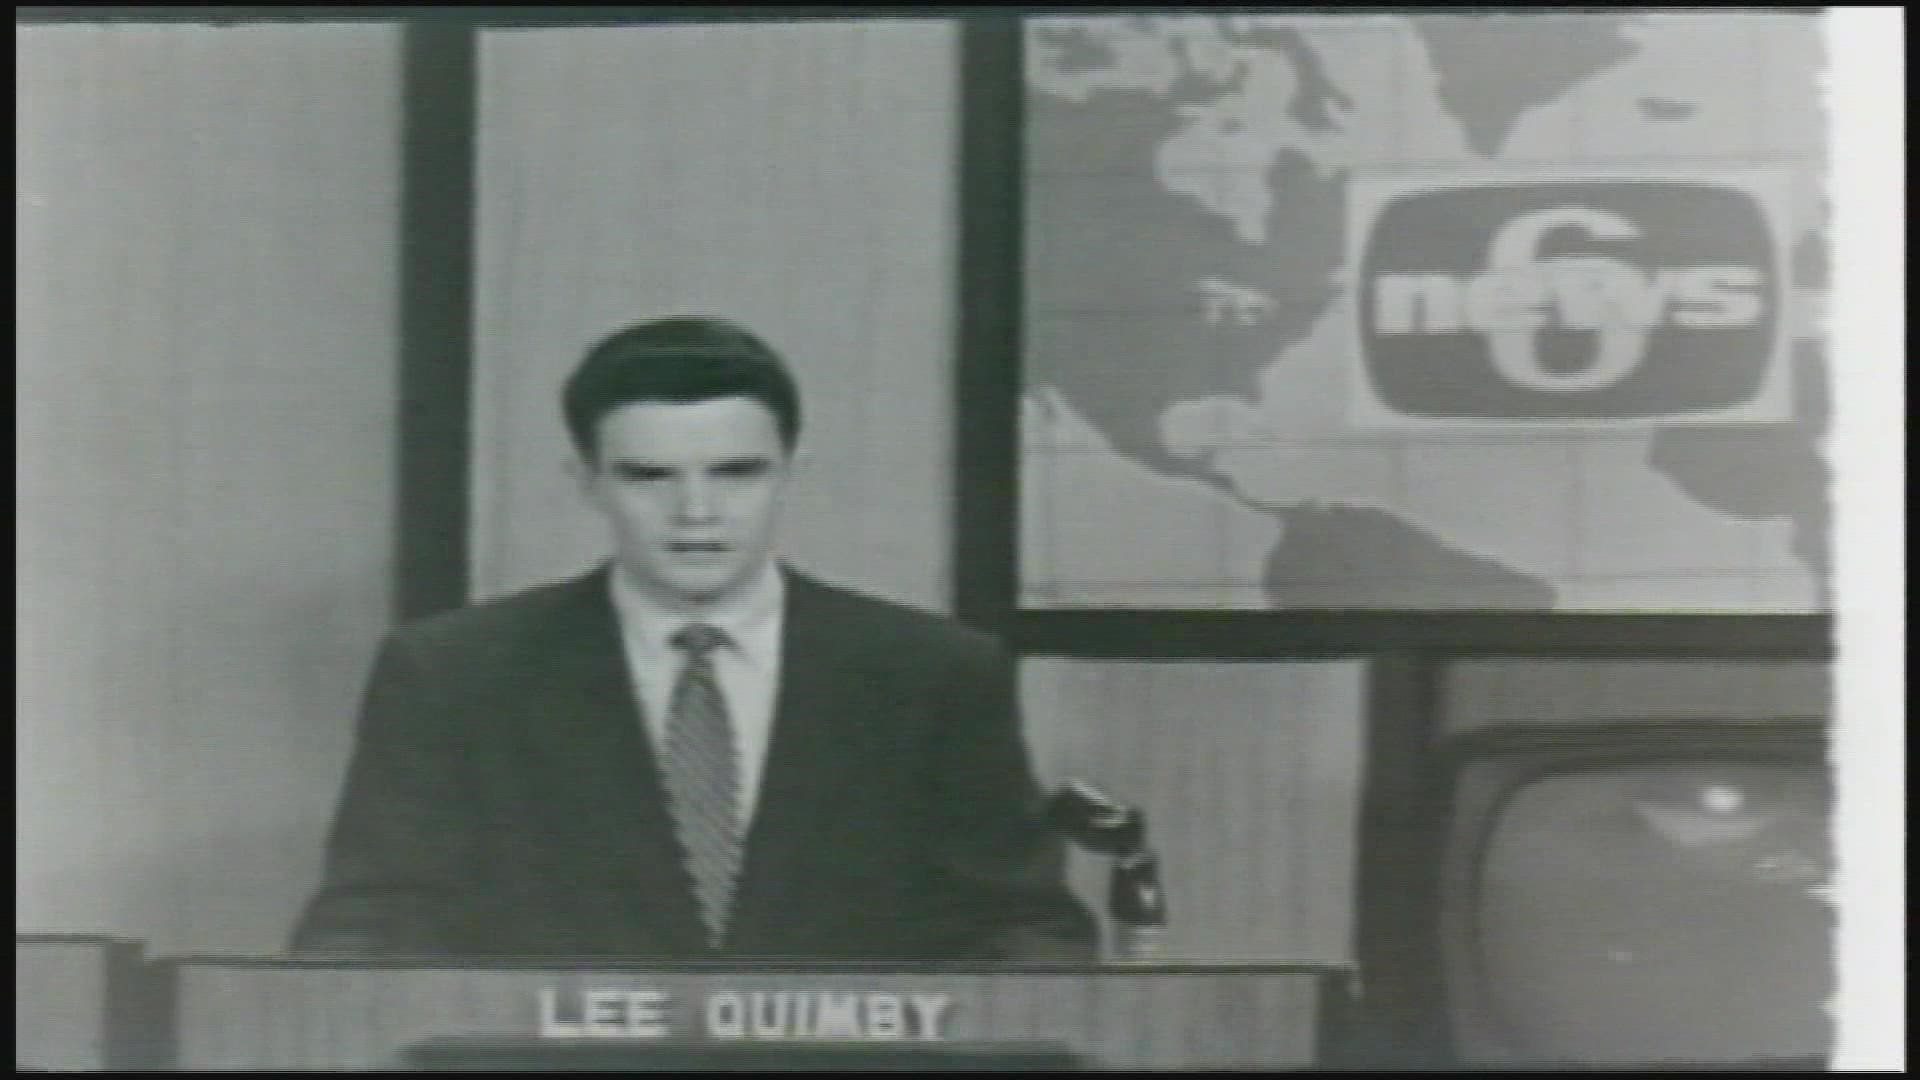 Lee Quimby worked at WCSH 6 for 20 years as a news anchor, commercial announcer, and host of Dialing for Dollars.